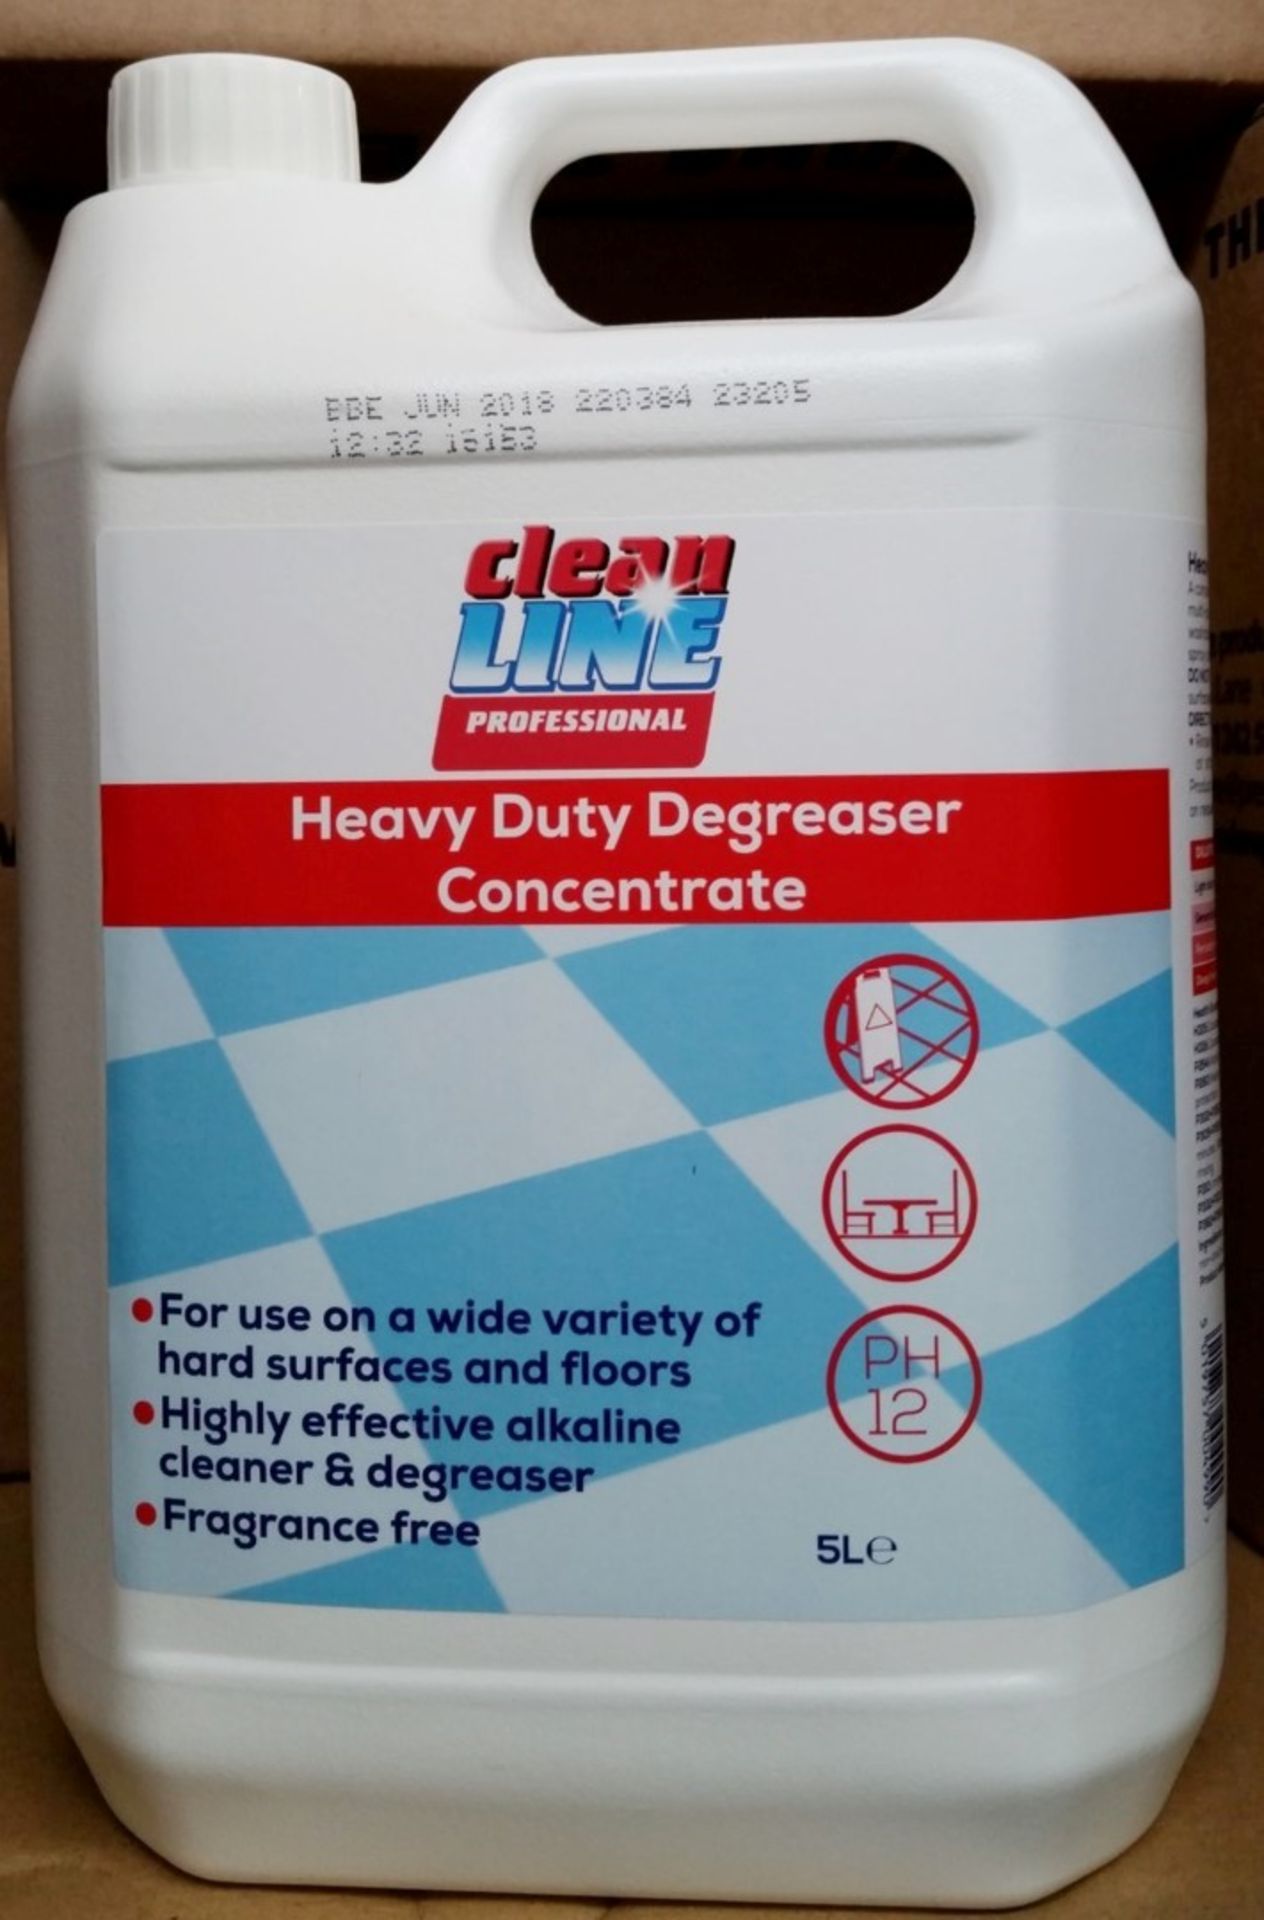 2 x Clean Line Professional 5 Litre Heavy Duty Degreaser Concentrate - Alkaline Cleaner &